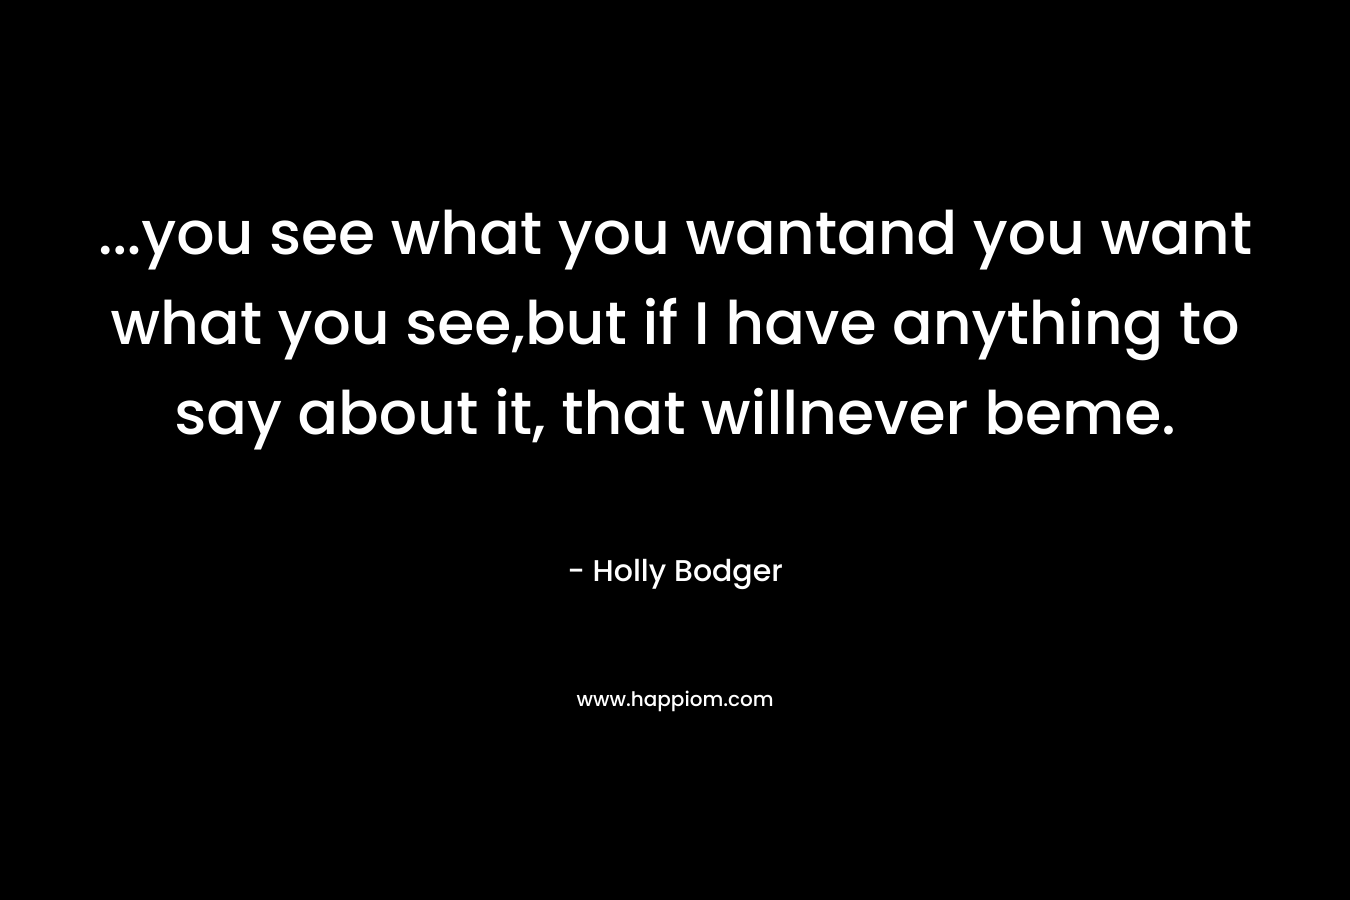 …you see what you wantand you want what you see,but if I have anything to say about it, that willnever beme. – Holly Bodger